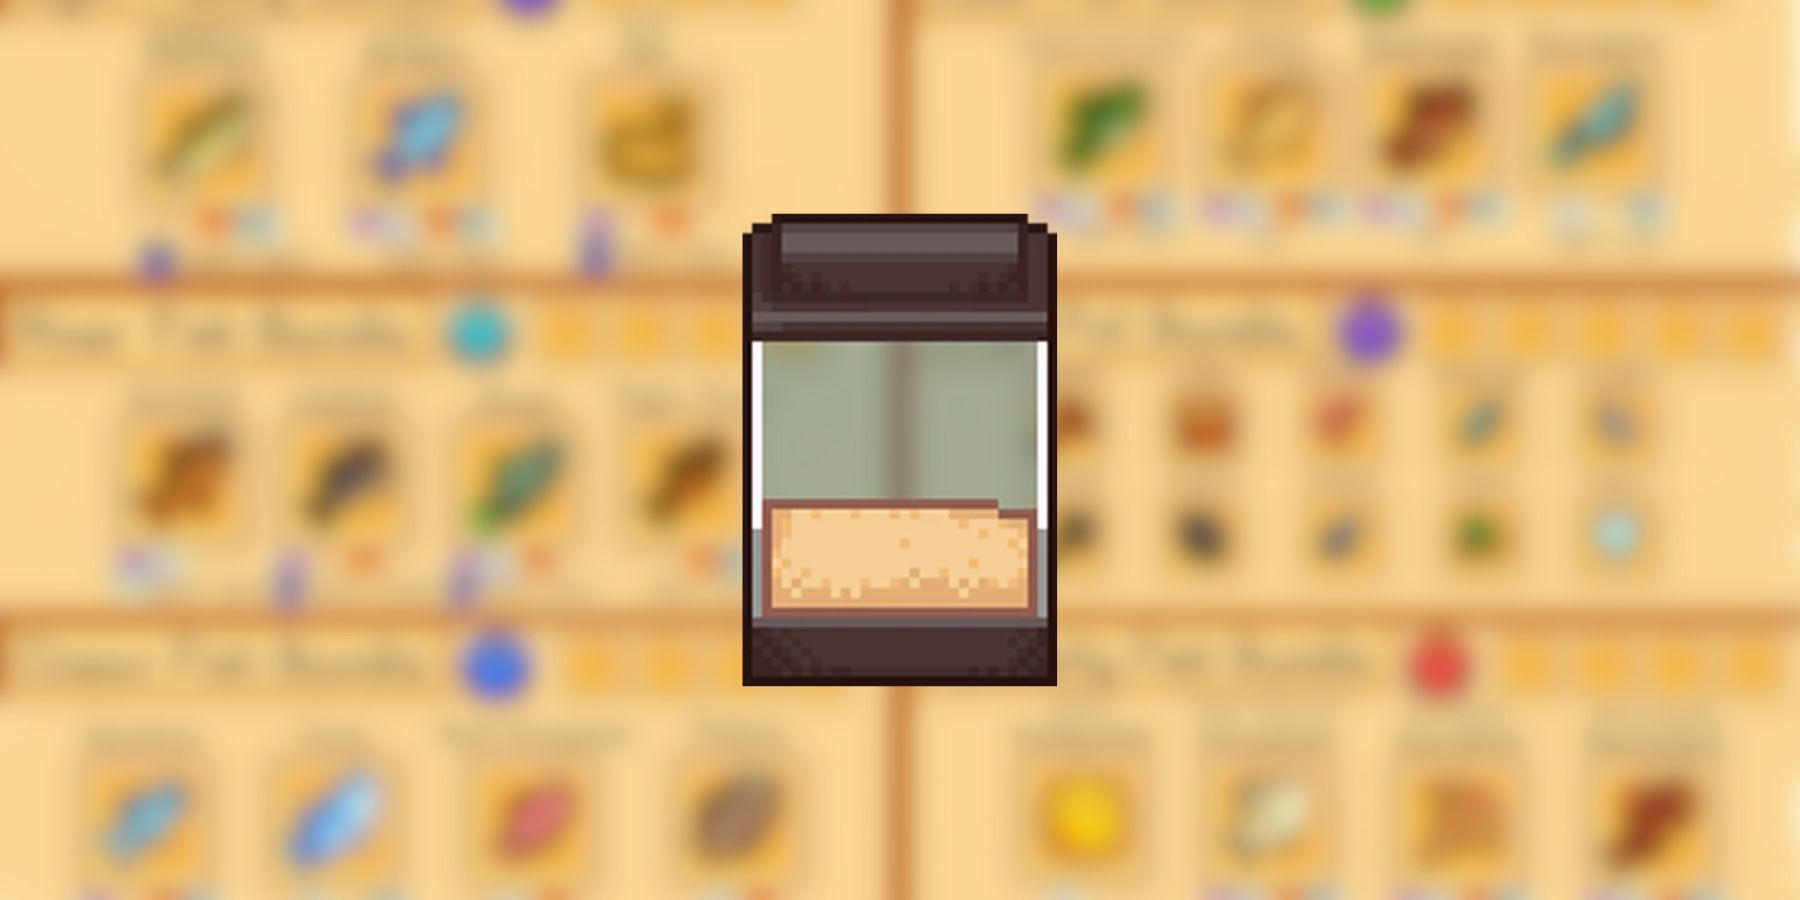 Stardew Valley: Complete Fish Tank Guide